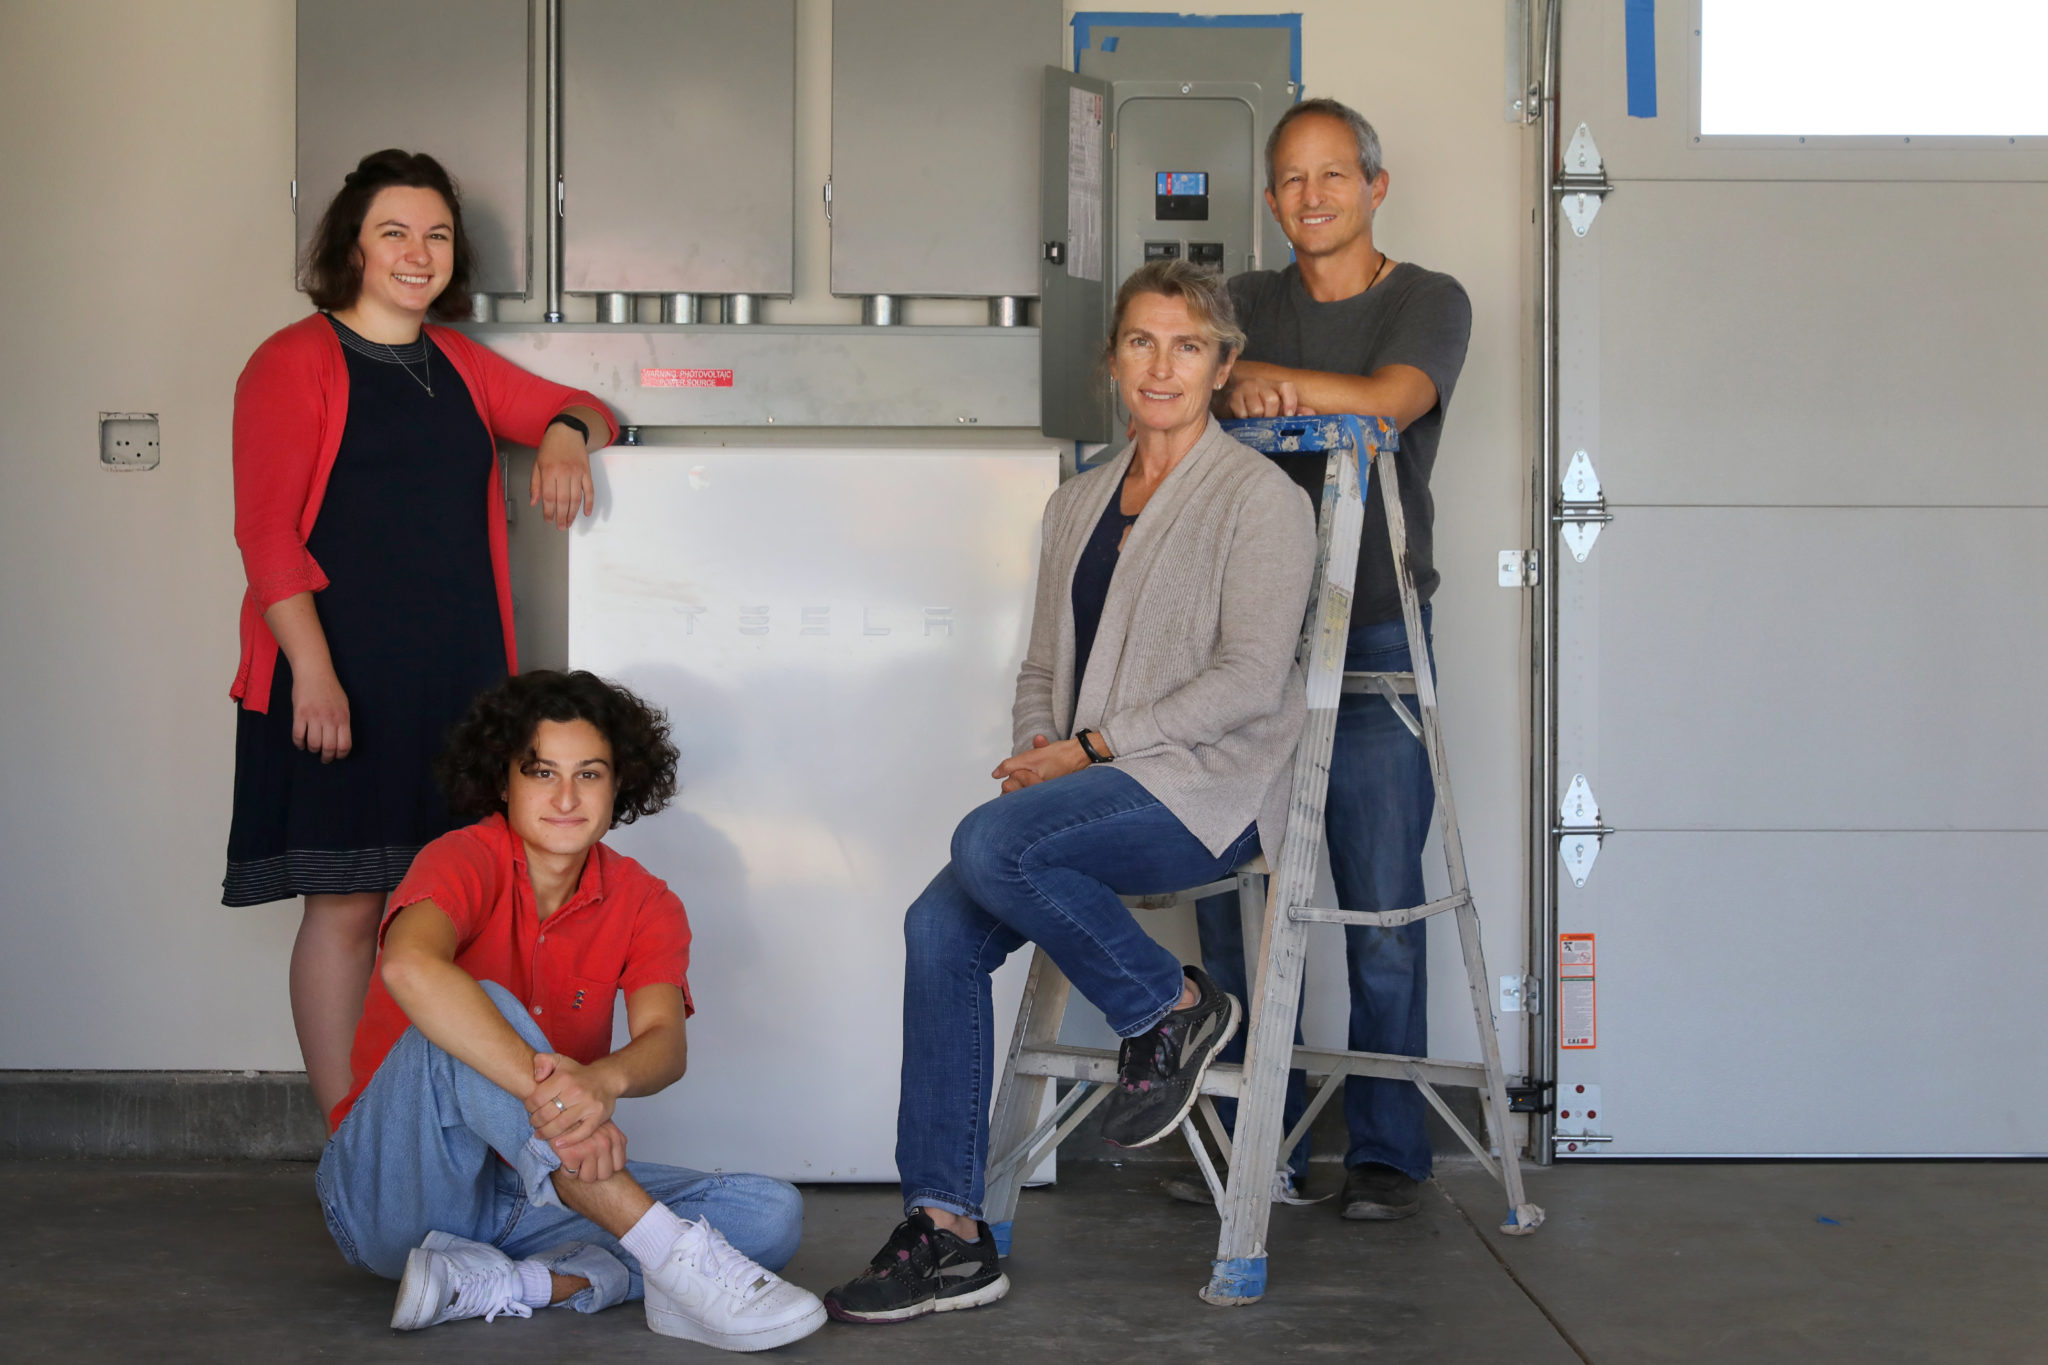 Joshua Weil, right, and his wife Claire Mollard, with their children Caleb and Sydney Weil have installed two Tesla Powerwalls along with solar panels into their rebuilt home, in Santa Rosa. (Christopher Chung / The Press Democrat)